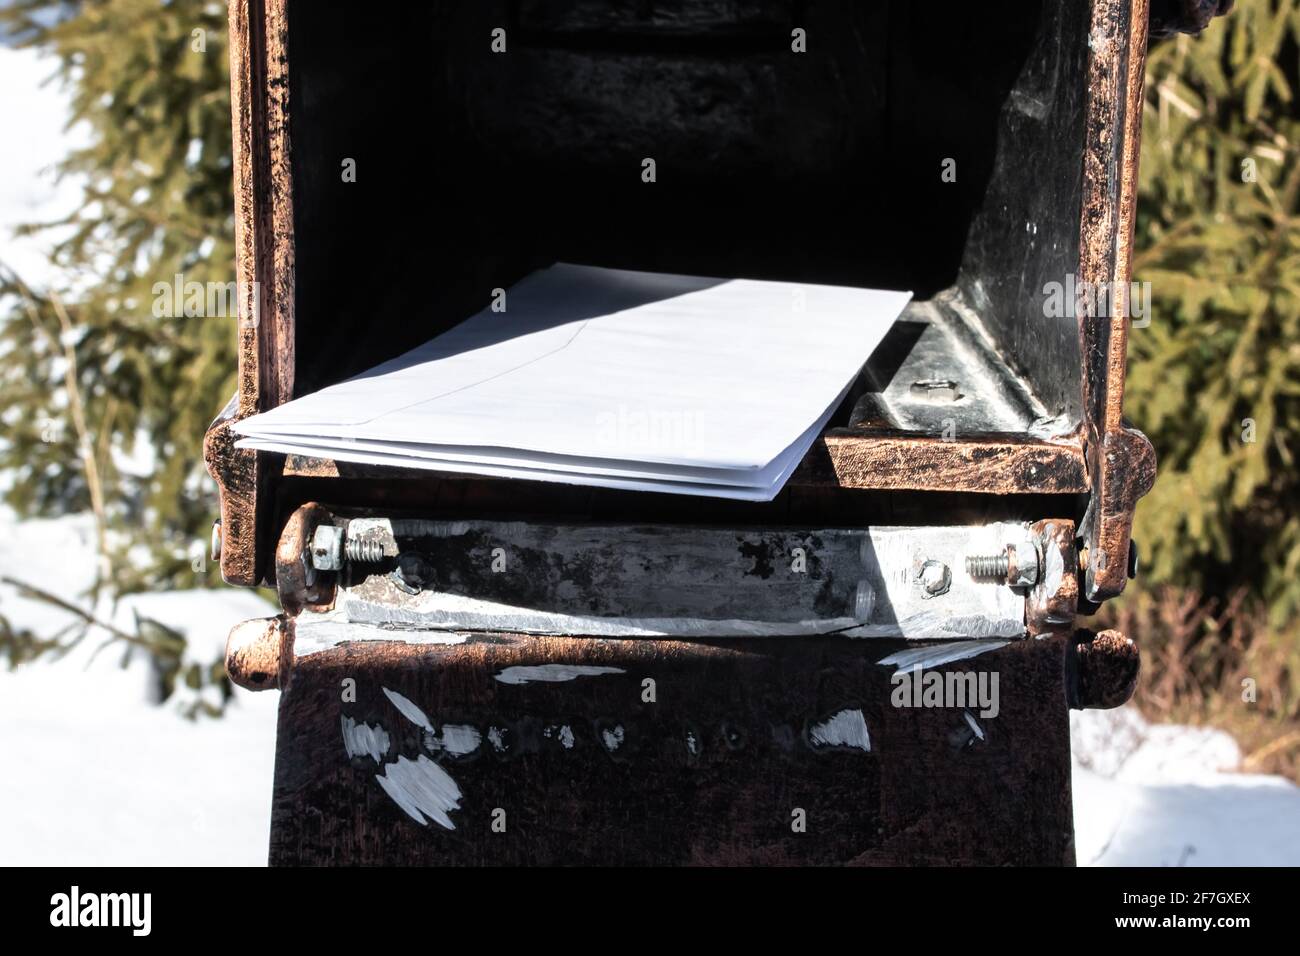 A stack of white legal envelops inside of a copper-tin mailbox in Ontario, Canada, evergreen spruce trees behind. February 2021. Stock Photo